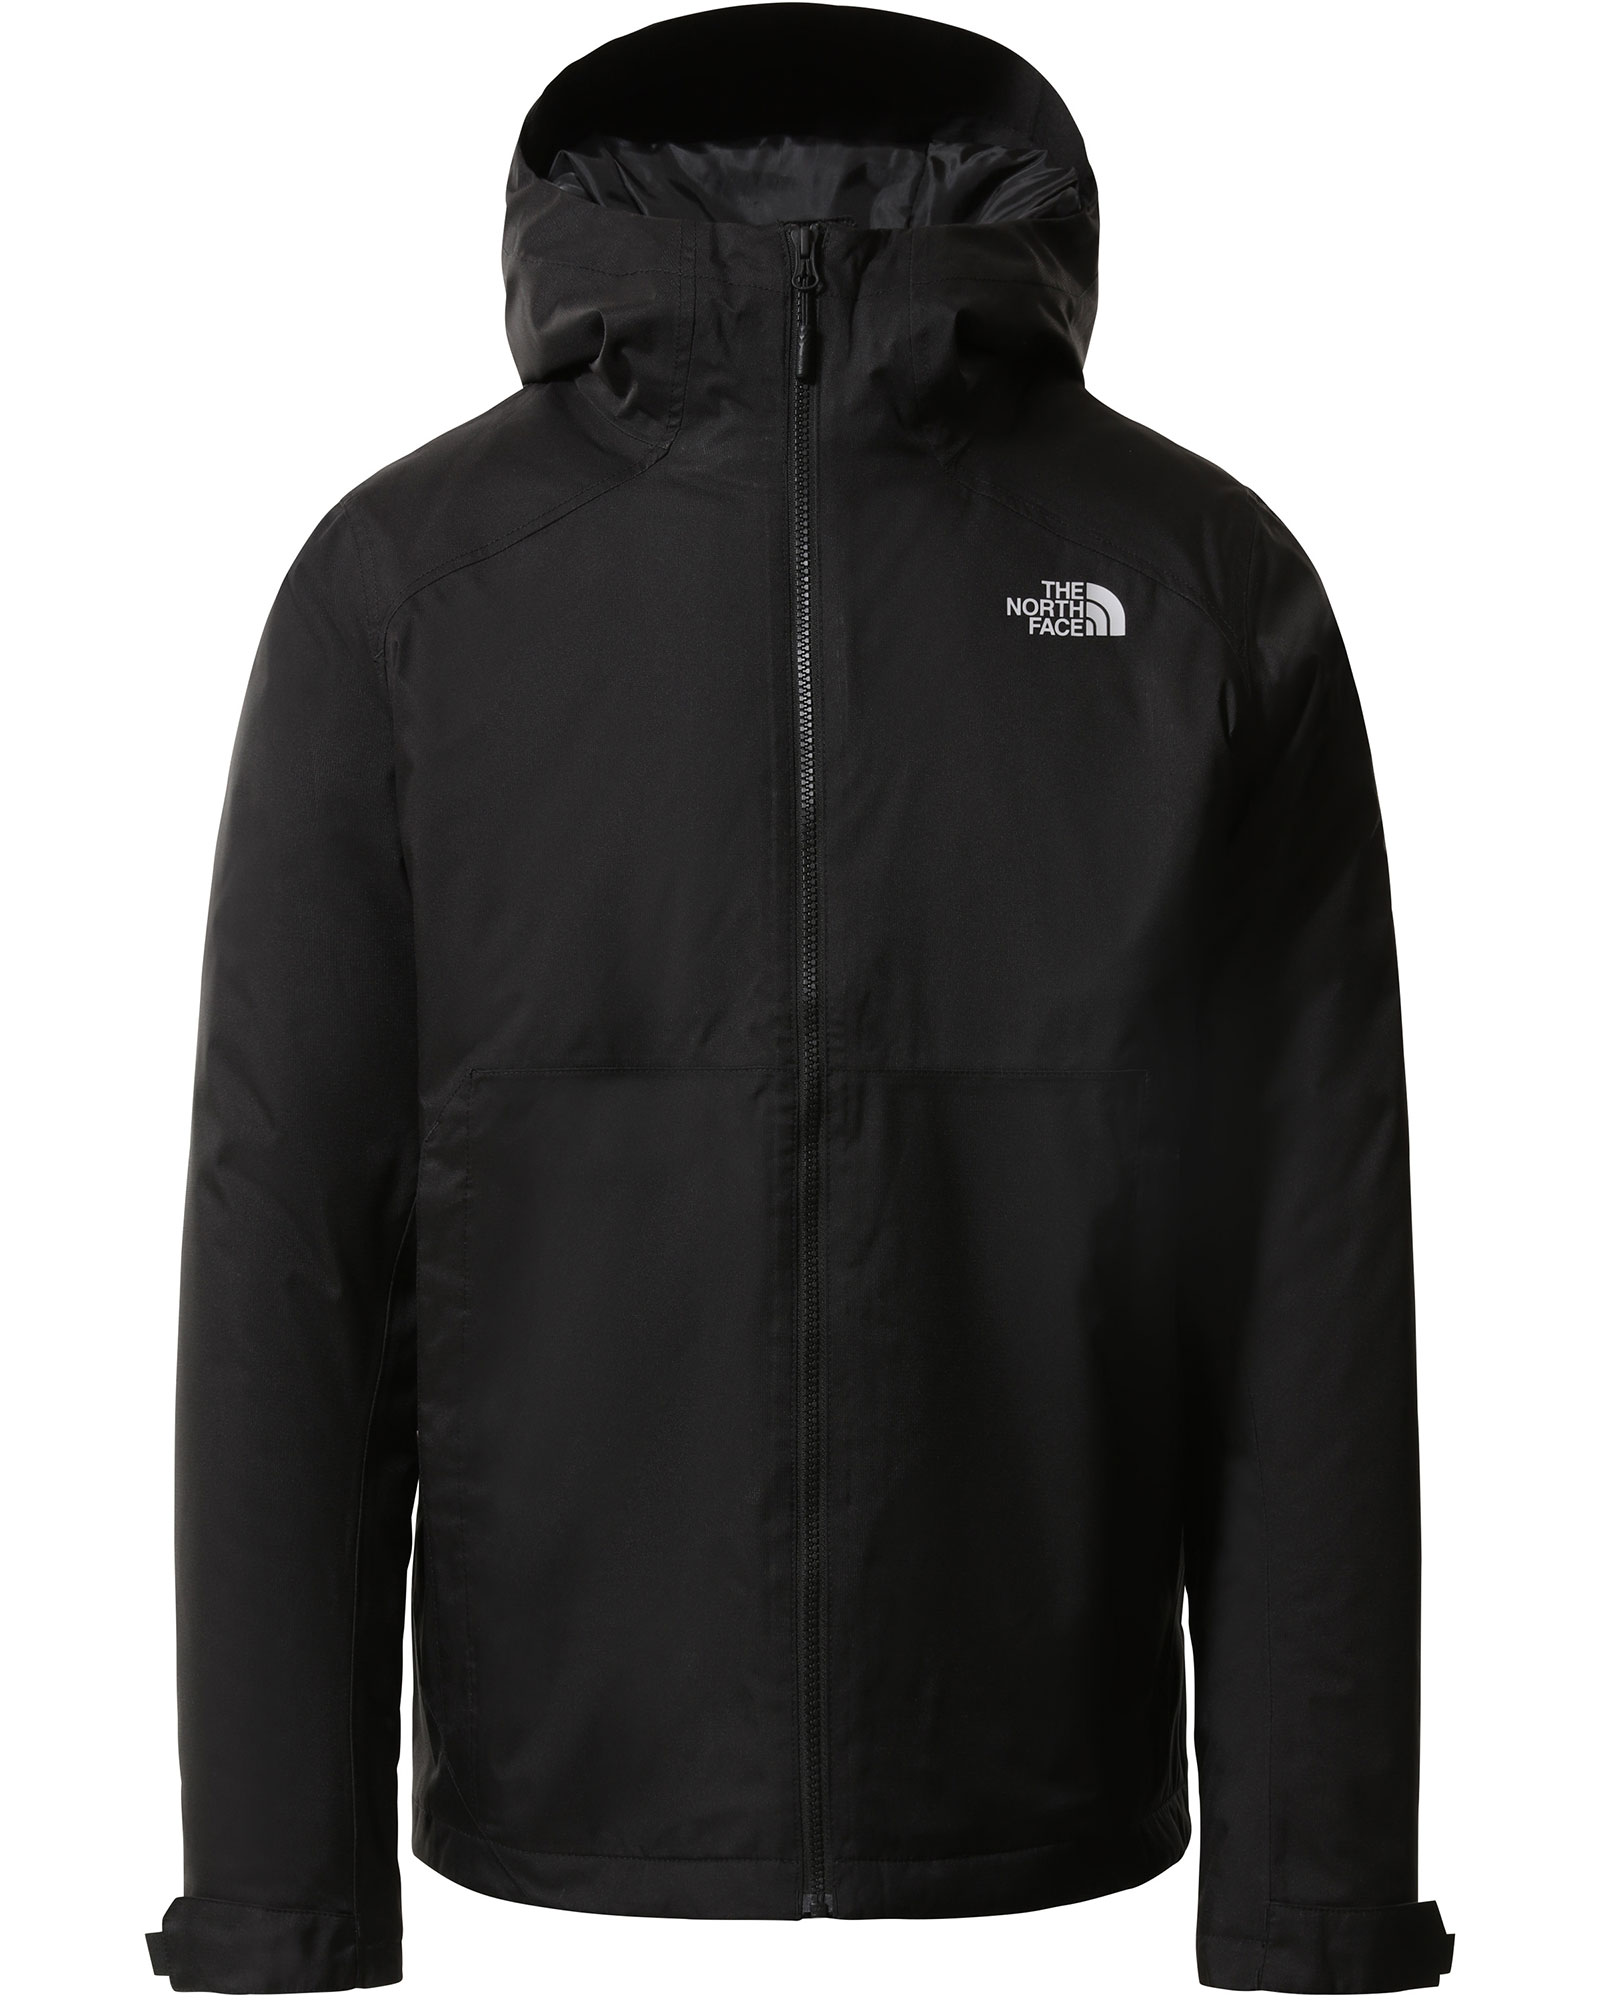 The North Face Millerton DryVent Men’s Insulated Jacket - TNF Black L